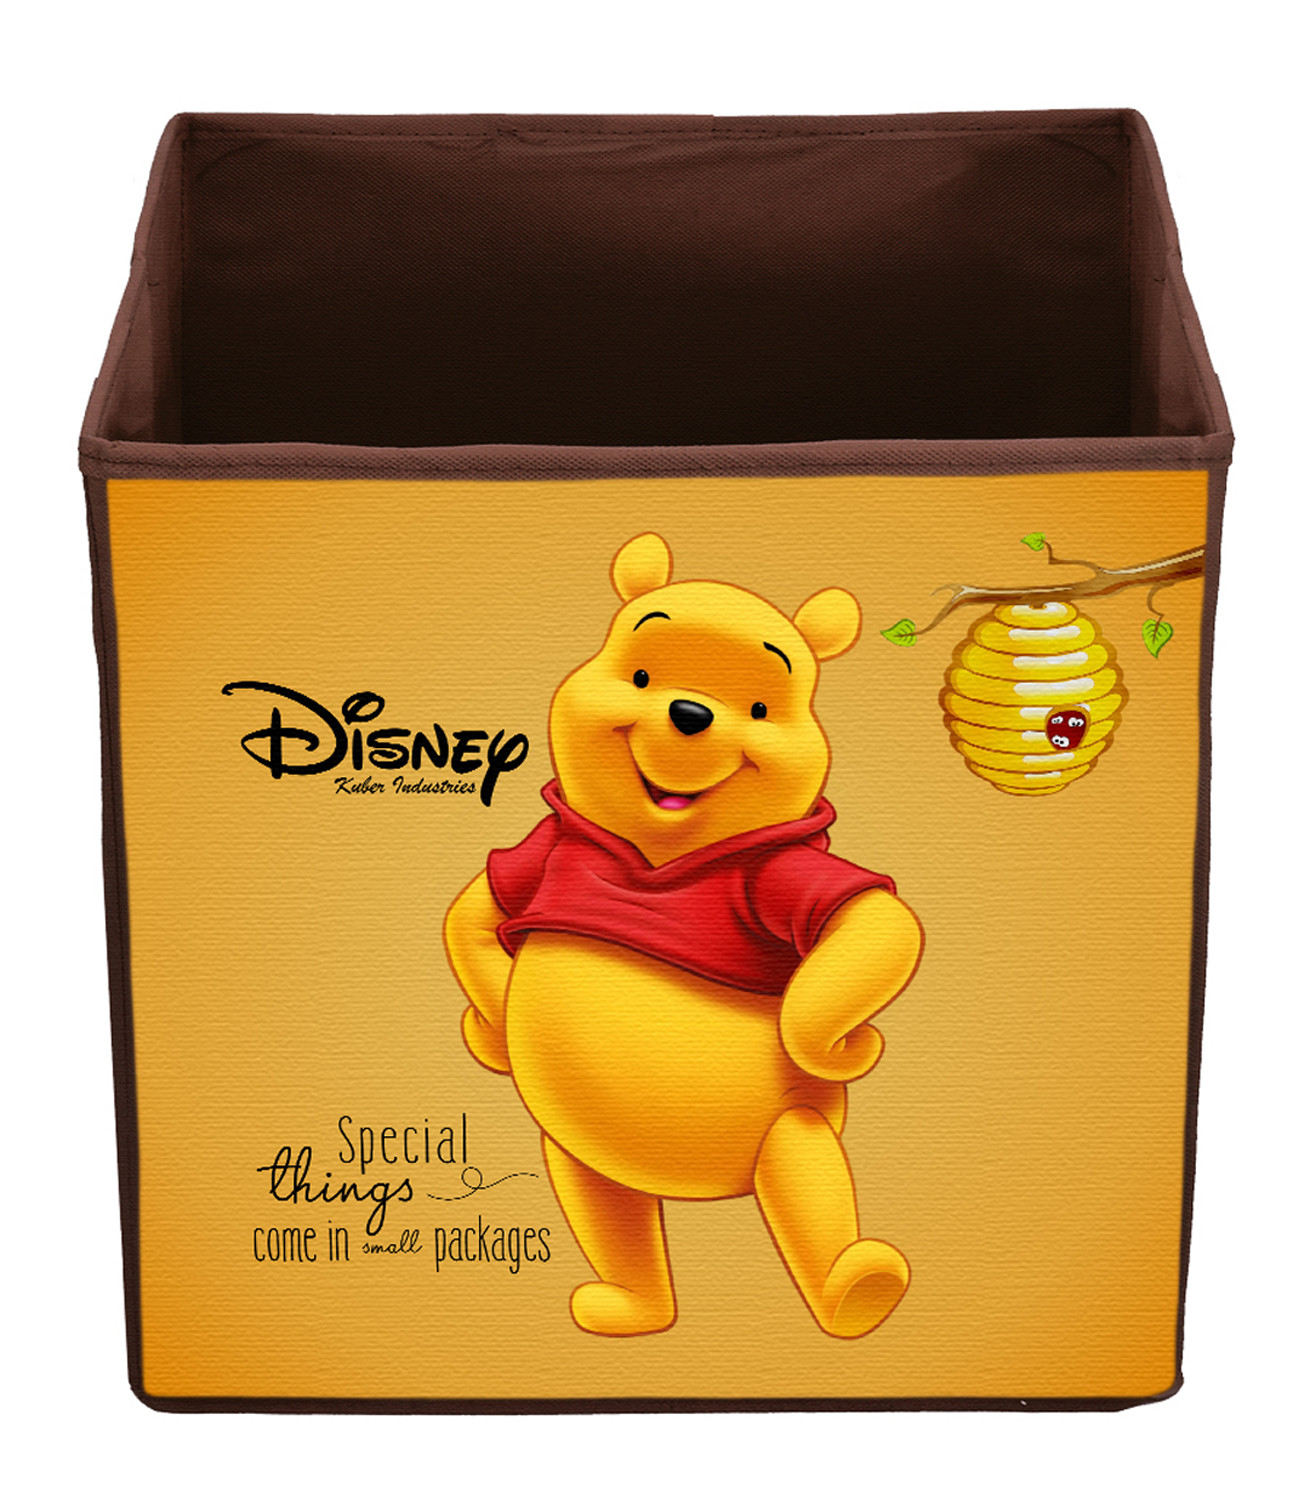 Kuber Industries Disney Winnie-The-Pooh & Mickey Print Non Woven Fabric Foldable Large Size Storage Cube Toy,Books,Shoes Storage Box With Handle (Maroon & Brown)